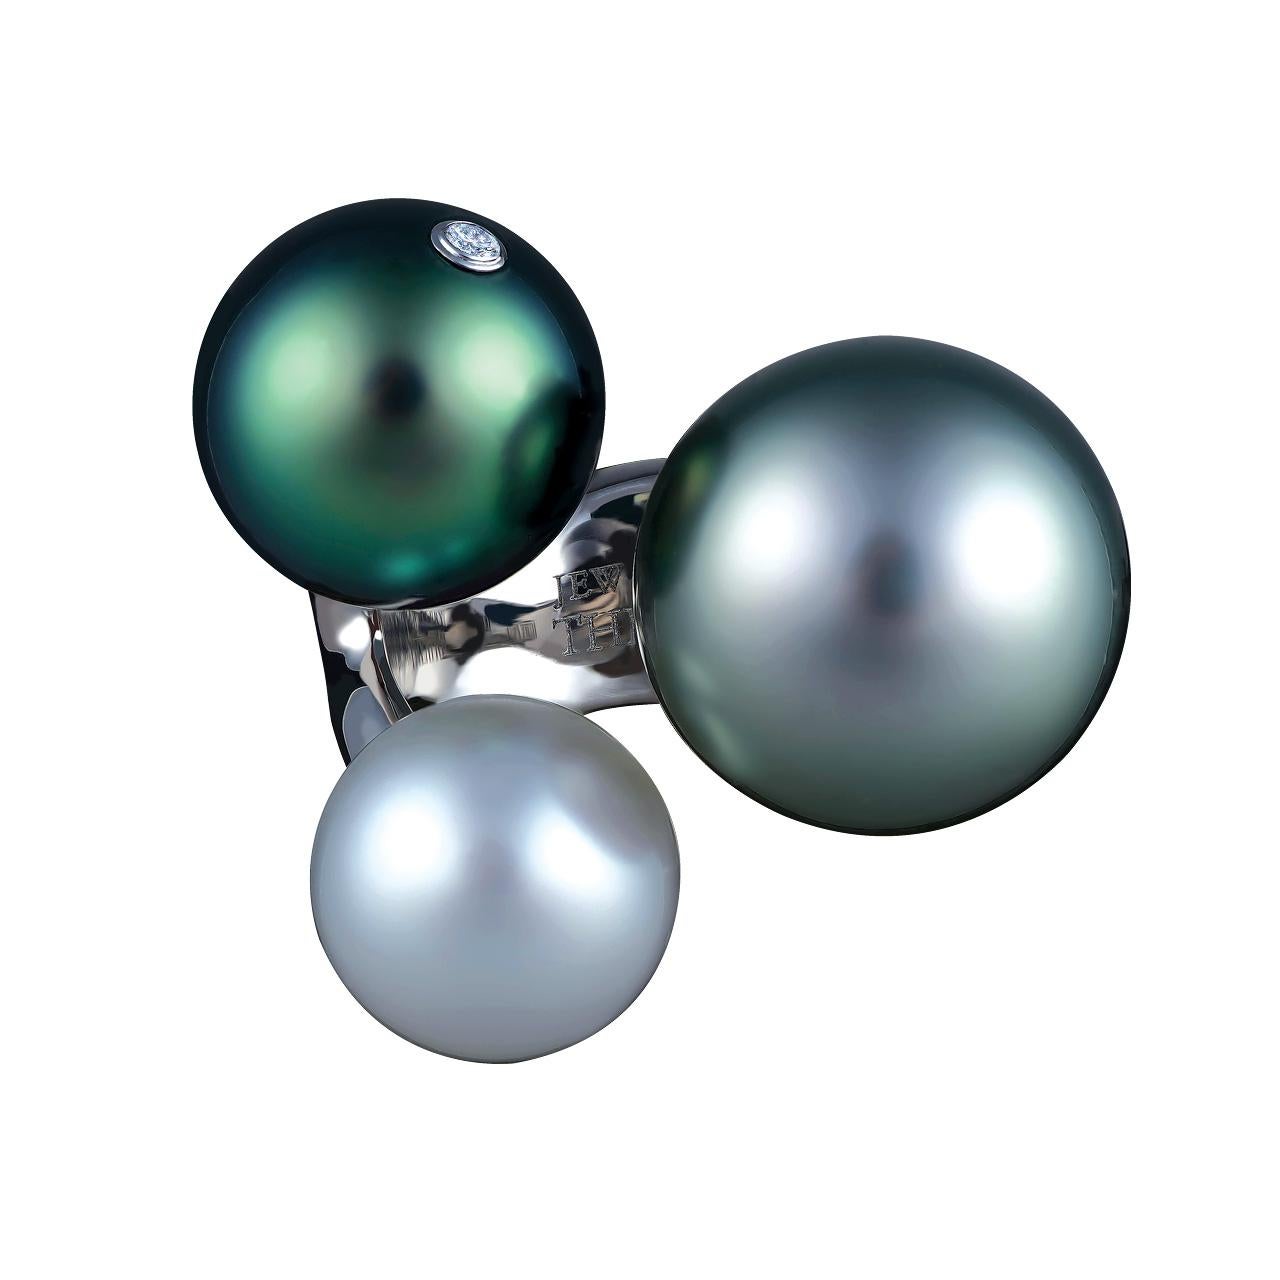 - 46 Round Diamonds – 0.31 ct, E-F/VVS1-VVS2
- 18.1 mm Grey Tahitian pearl
- 16.1 mm Dark Tahitian pearl
- 12.3 mm White South Sea pearl
- 18K White Gold 
- Weight: 32.24 g
- Size: 17.3 mm
This spectacular ring from the Bionics collection of Jewelry